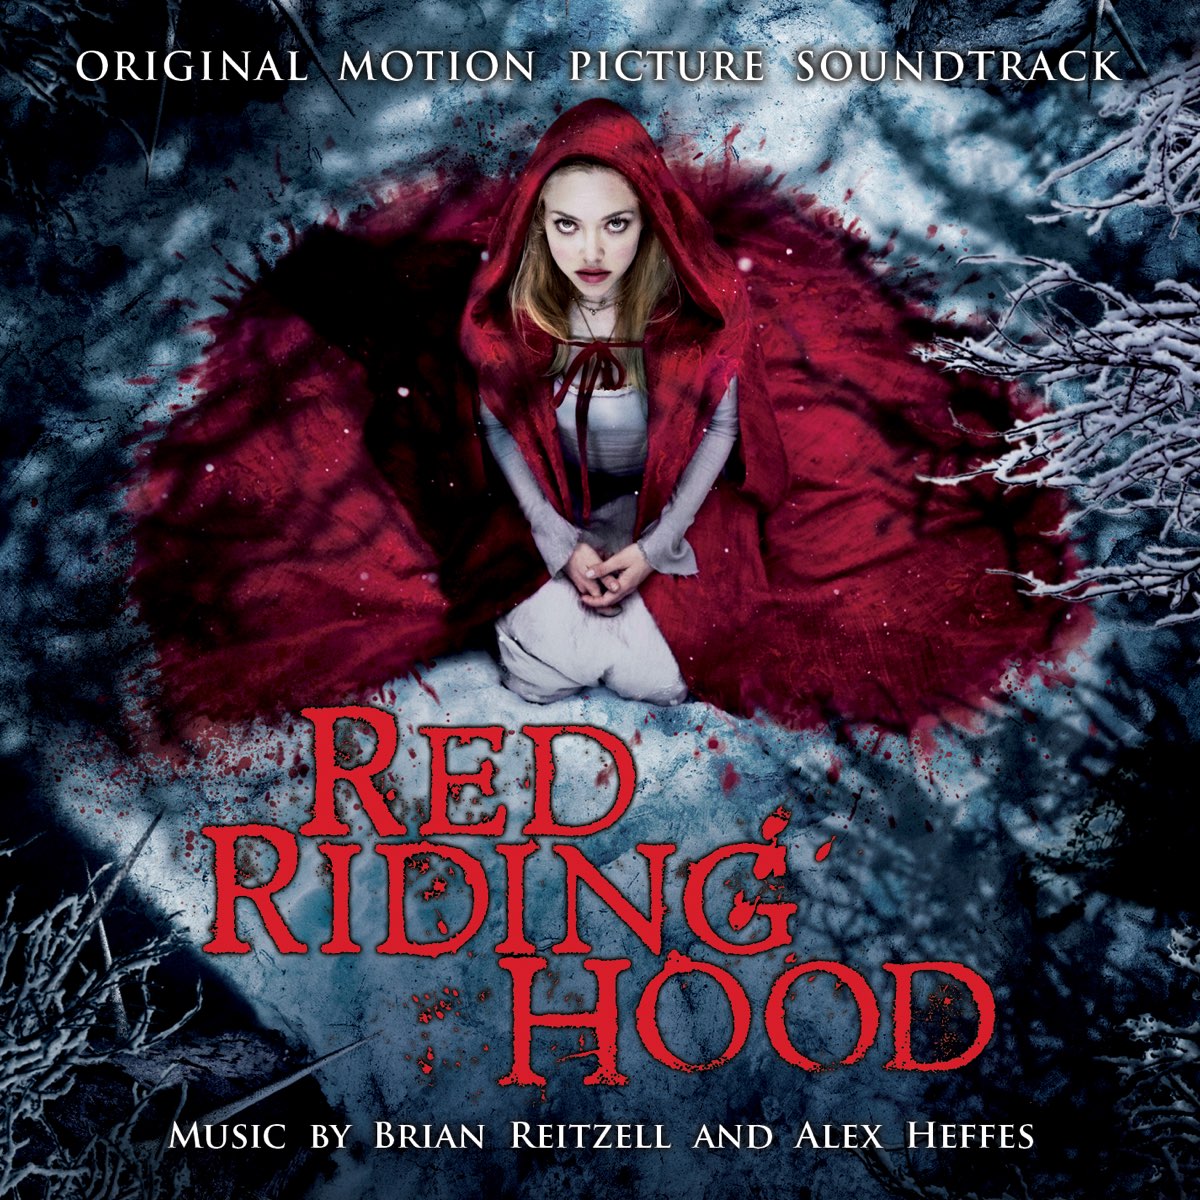 Red Riding (Original Motion Picture Soundtrack) by Various Artists on Apple Music